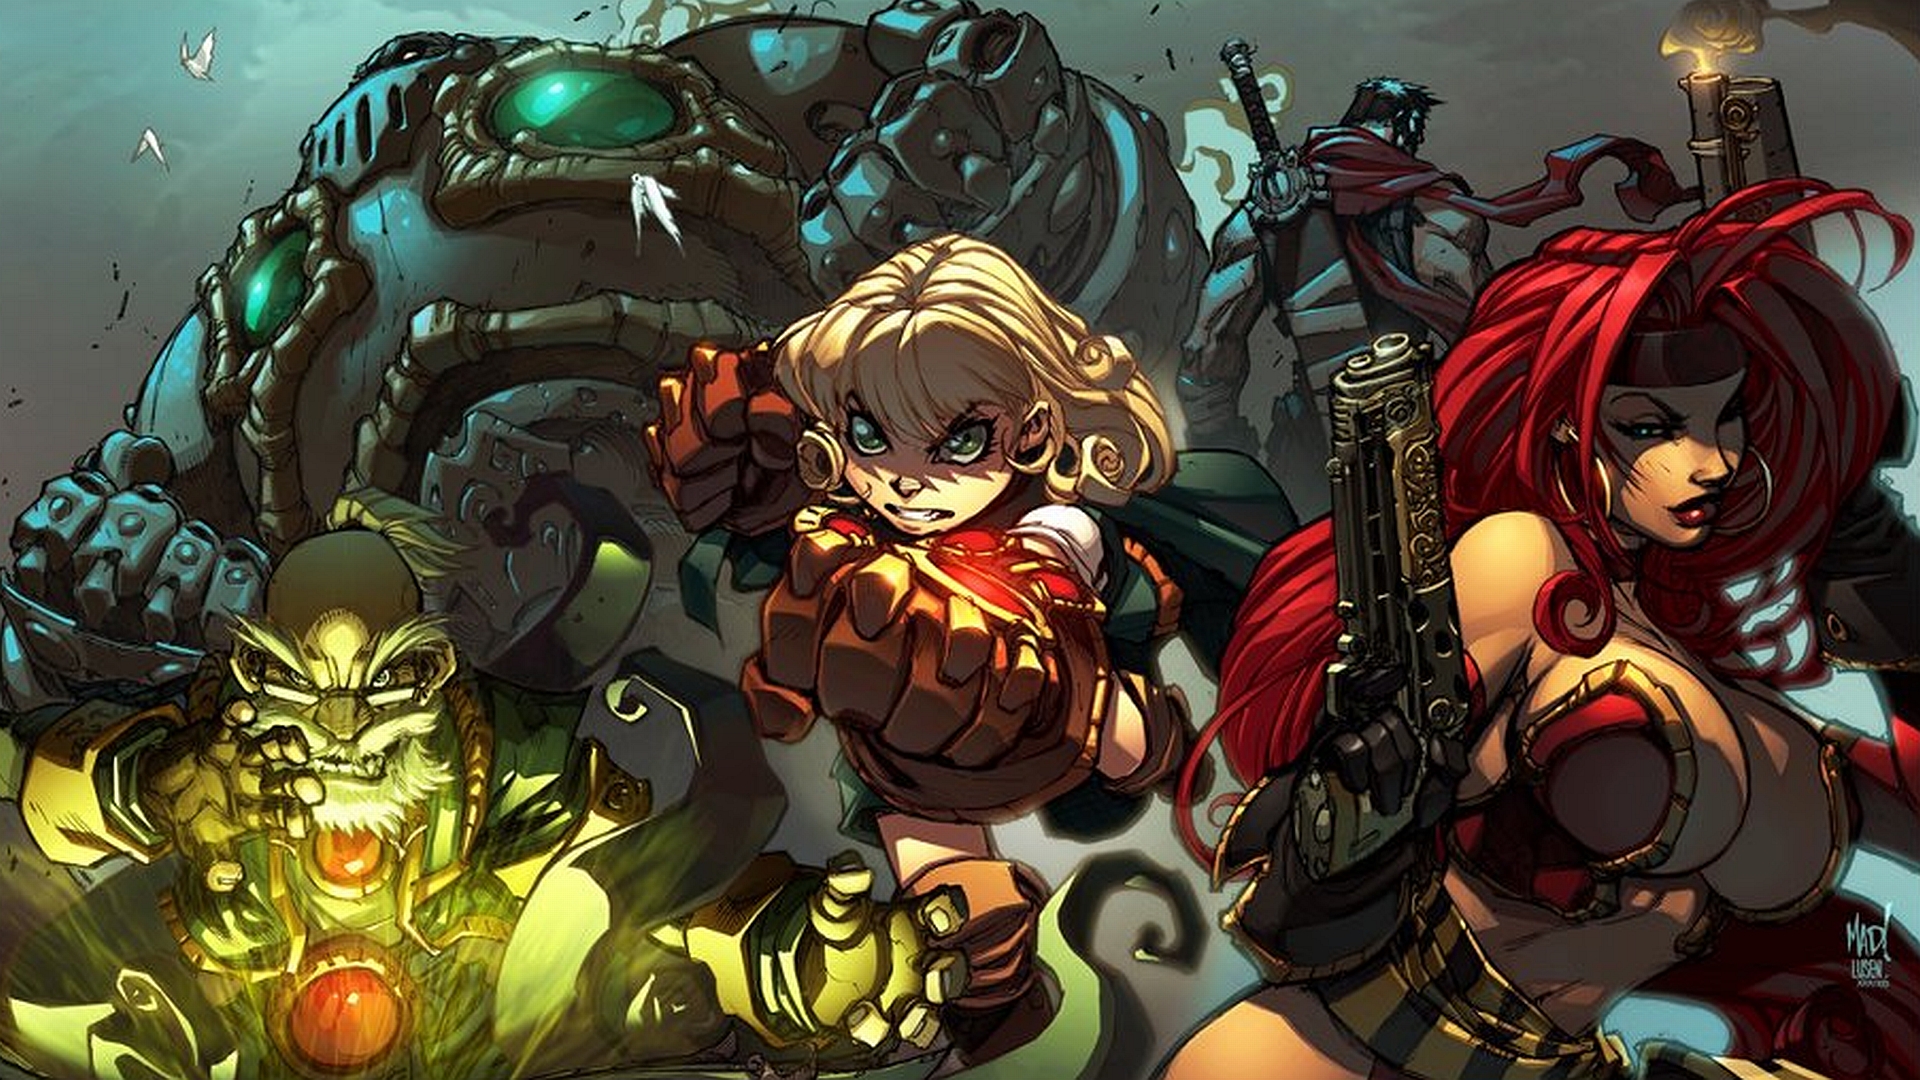 High Resolution Wallpaper | Battle Chasers 1920x1080 px